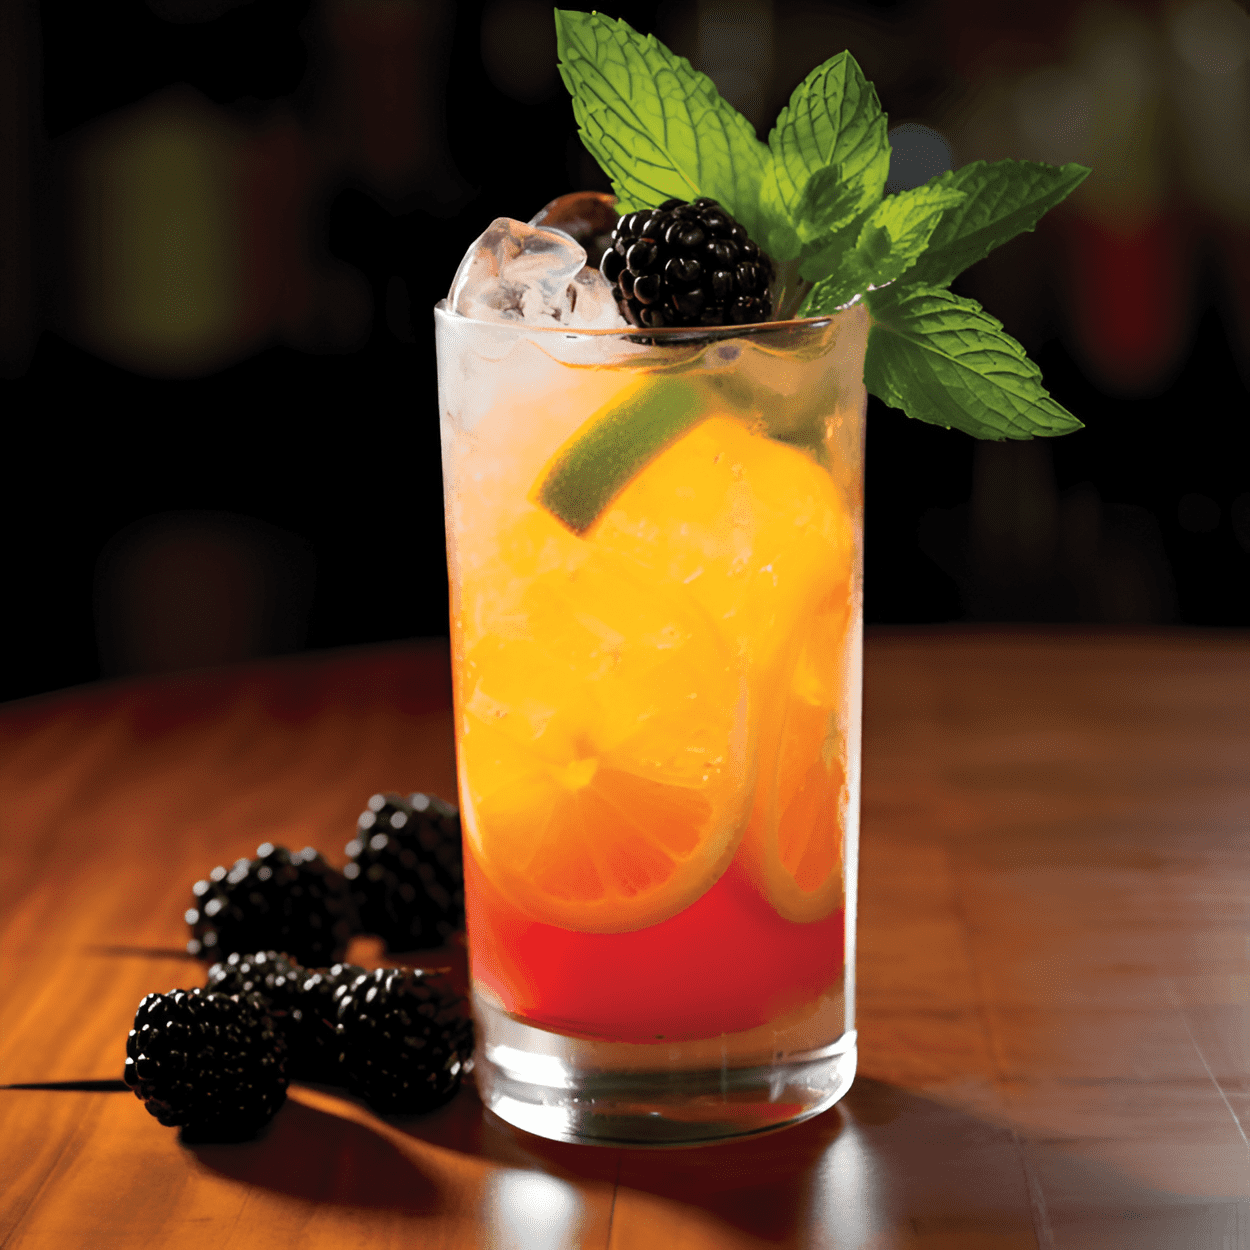 Mango-Basil Bramble Cocktail Recipe - The Mango-Basil Bramble is a delightful balance of sweet, sour, and herbal flavors. The ripe mango provides a sweet, tropical base, while the lemon juice adds a tangy kick. The basil leaves lend a refreshing, herbaceous note that complements the fruitiness perfectly.